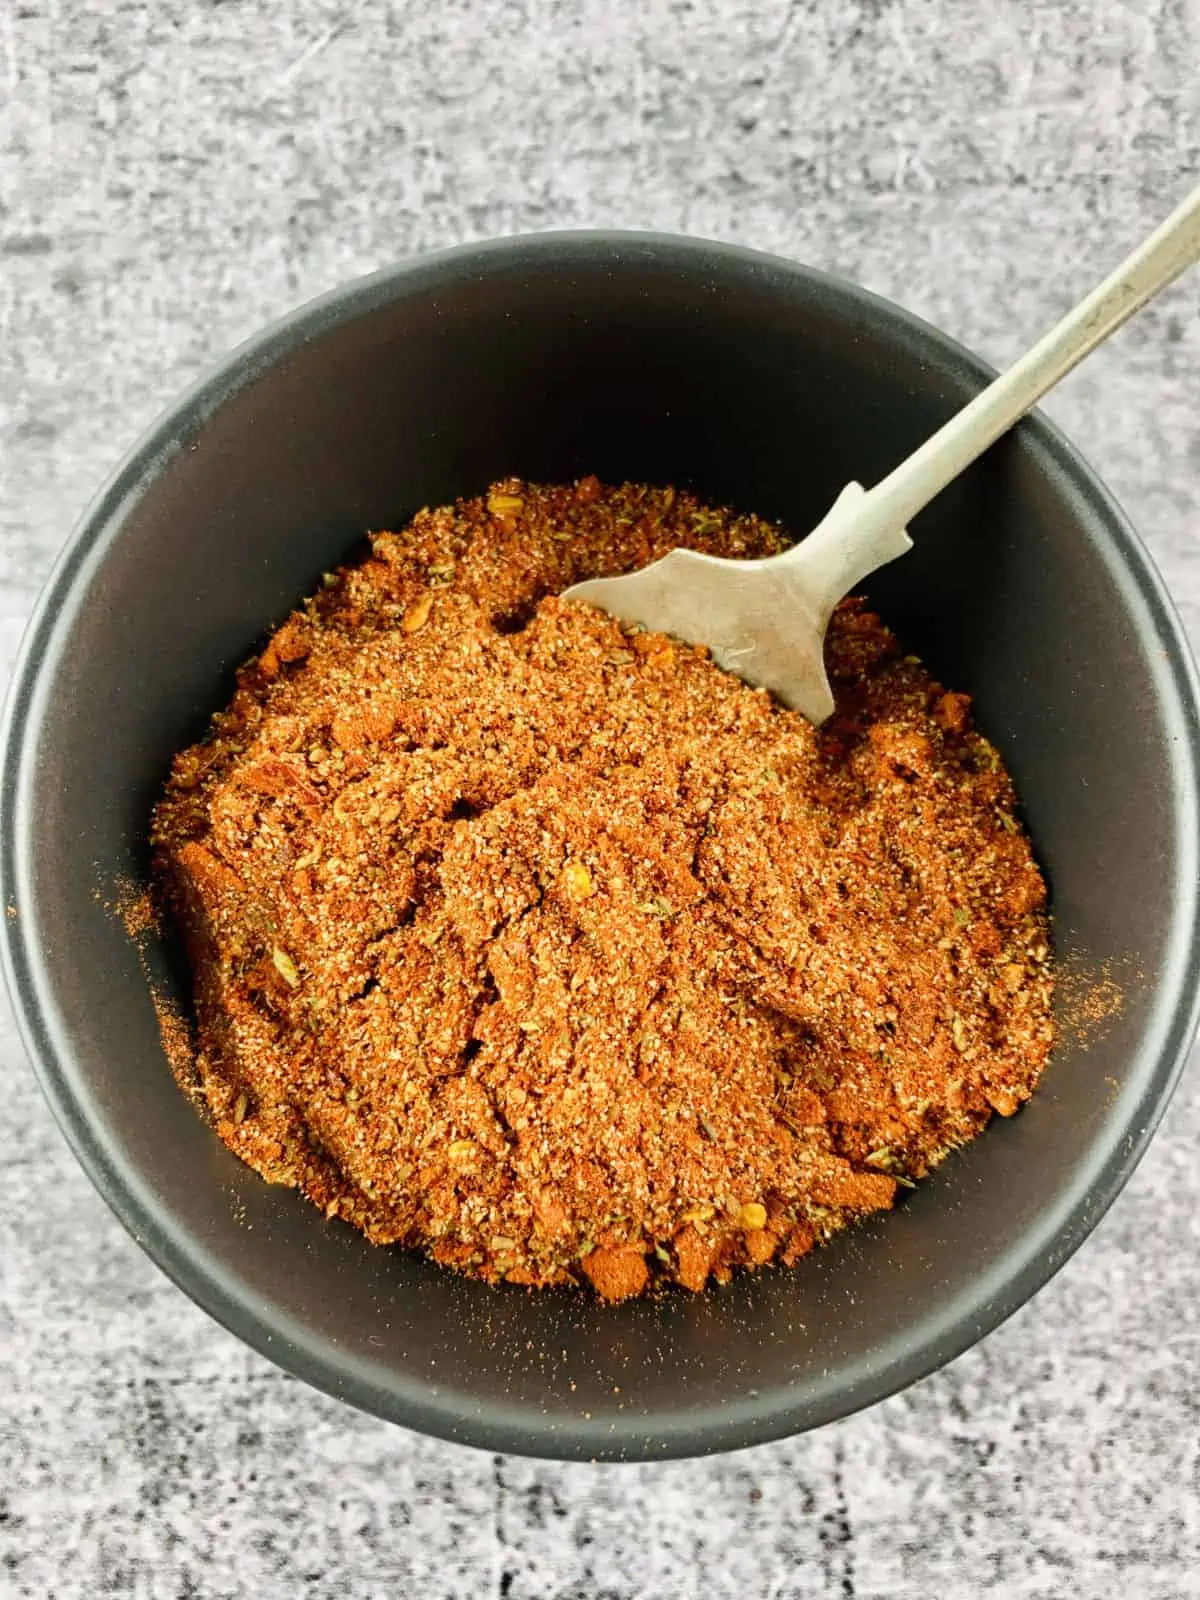 Keto-friendly taco seasoning in a black bowl with a silver spoon.